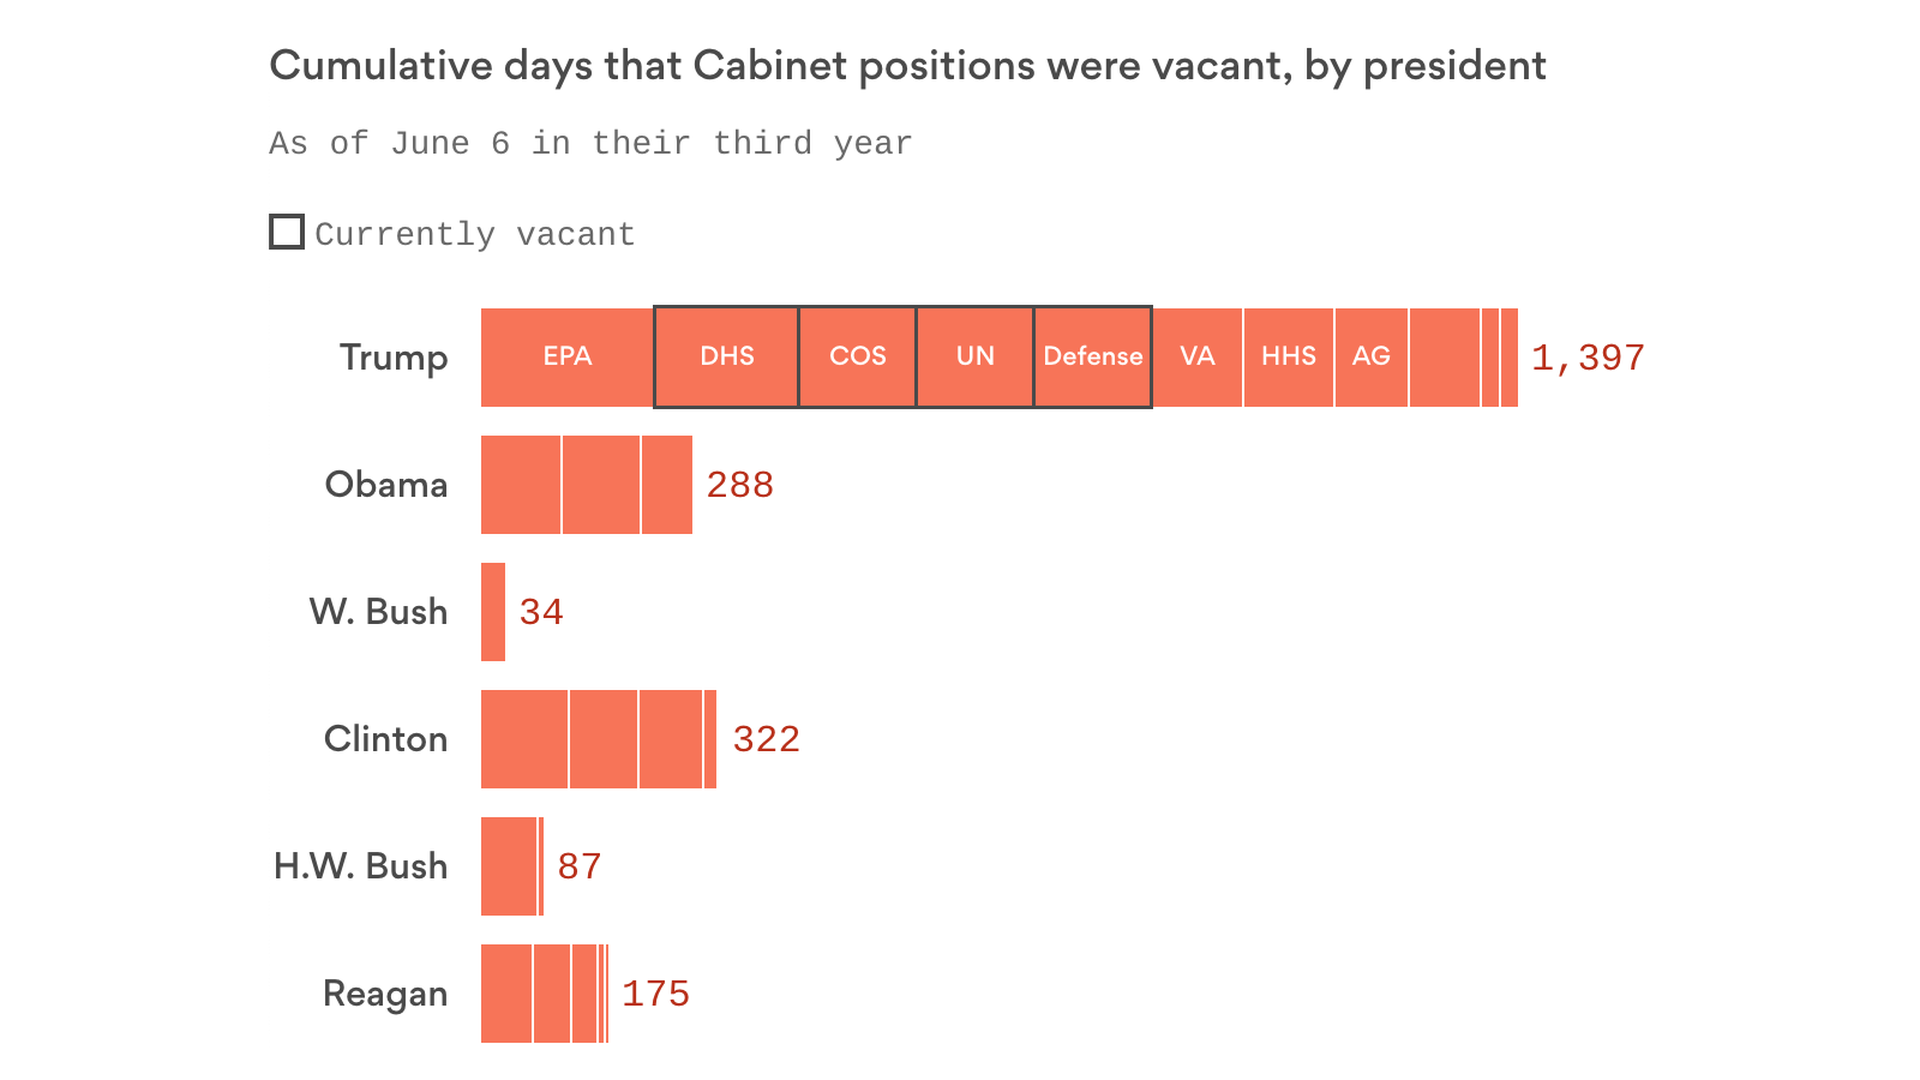 Cabinet Meeting Seating Chart